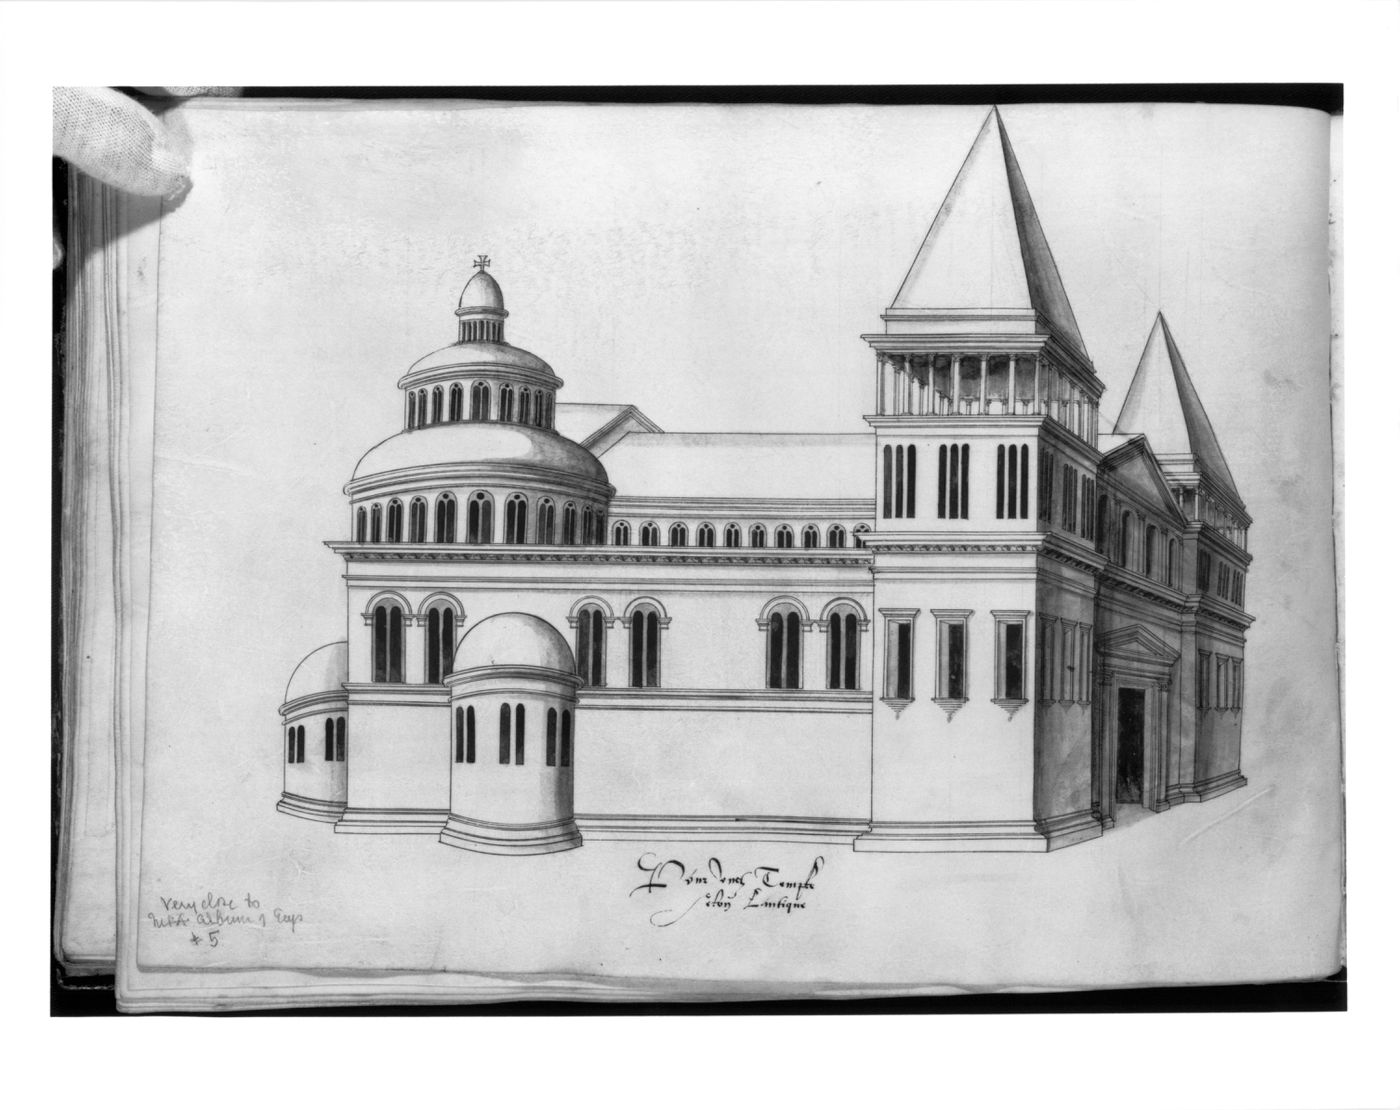 Perspective view for a temple in the antique manner